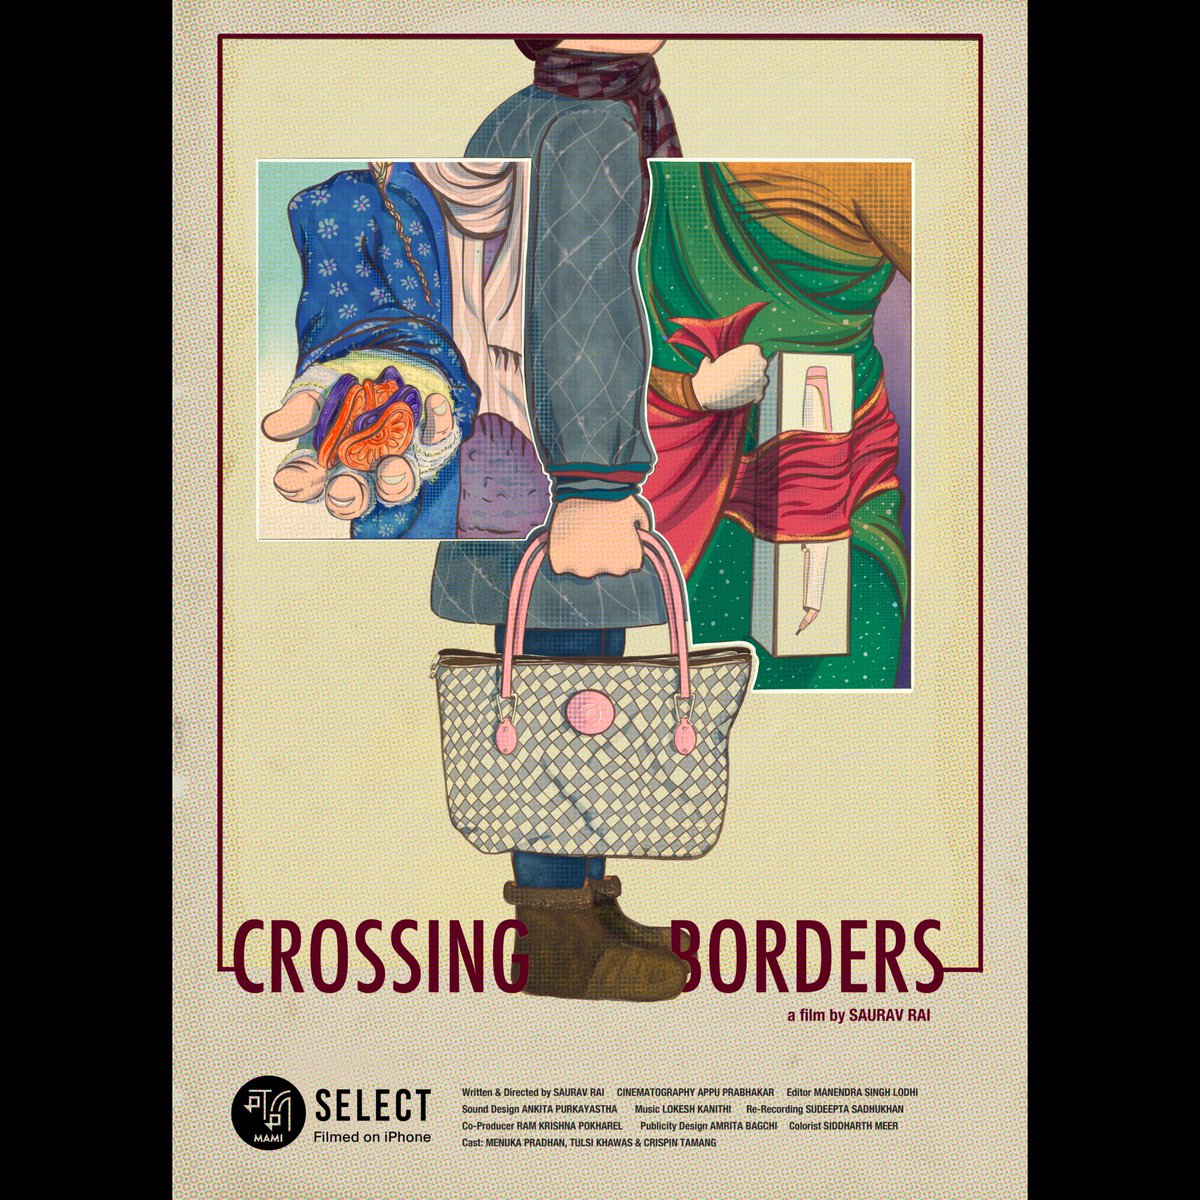 Three lives get entangled in catch 22 situations while they illegally enter into a country to smuggle goods for their livelihood.

#CrossingBorders by #SauravRai.

🔗 youtu.be/tMoNhpEczbY?si…

@sidmeer